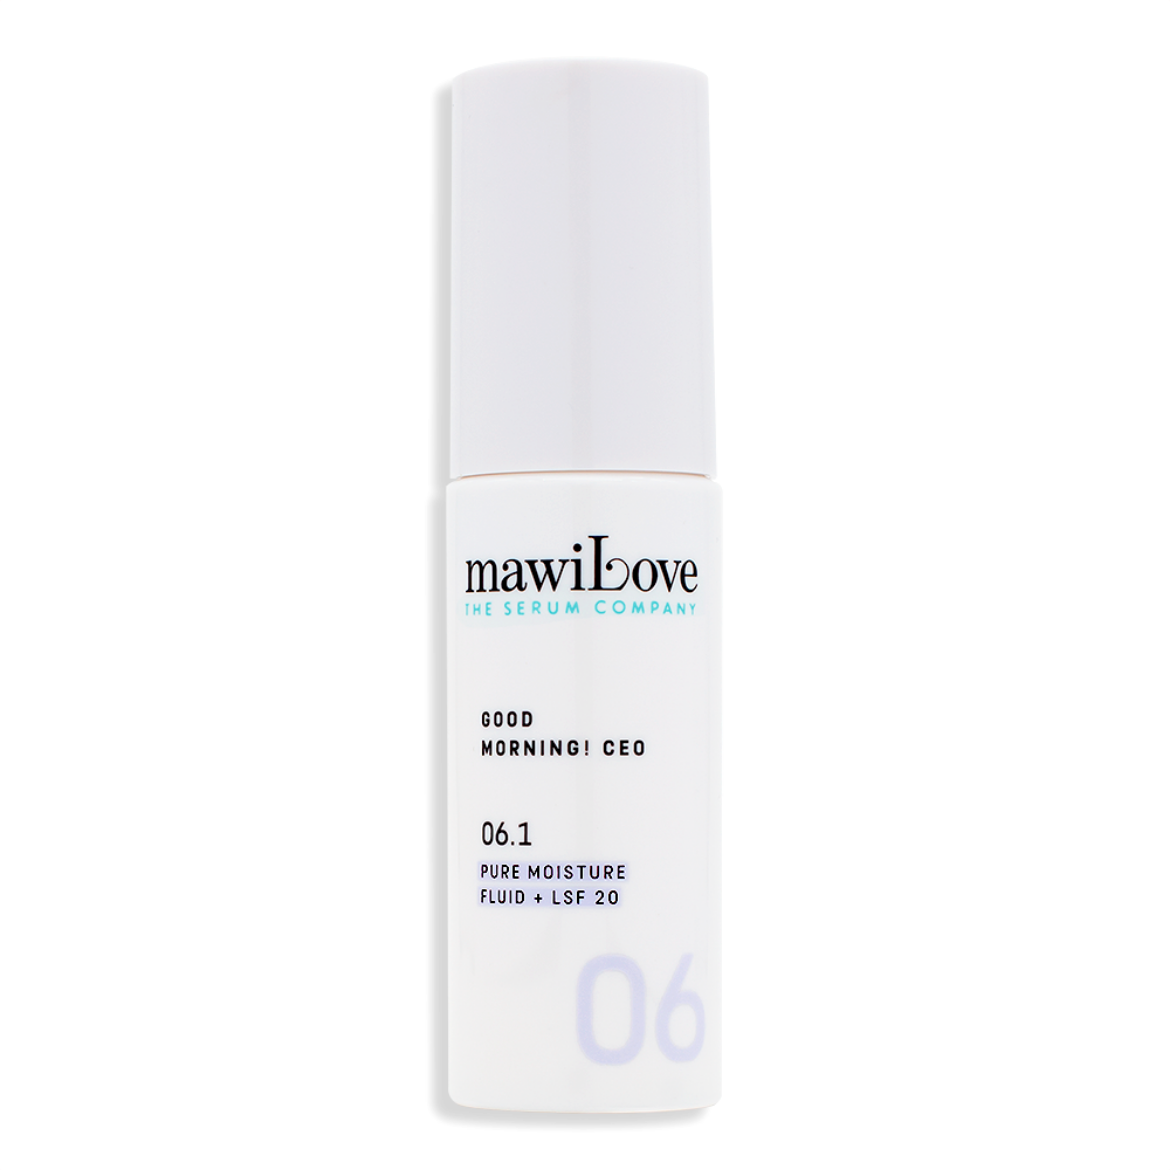 Image of mawiLove Good Morning! CEO 06.1 (50ml)